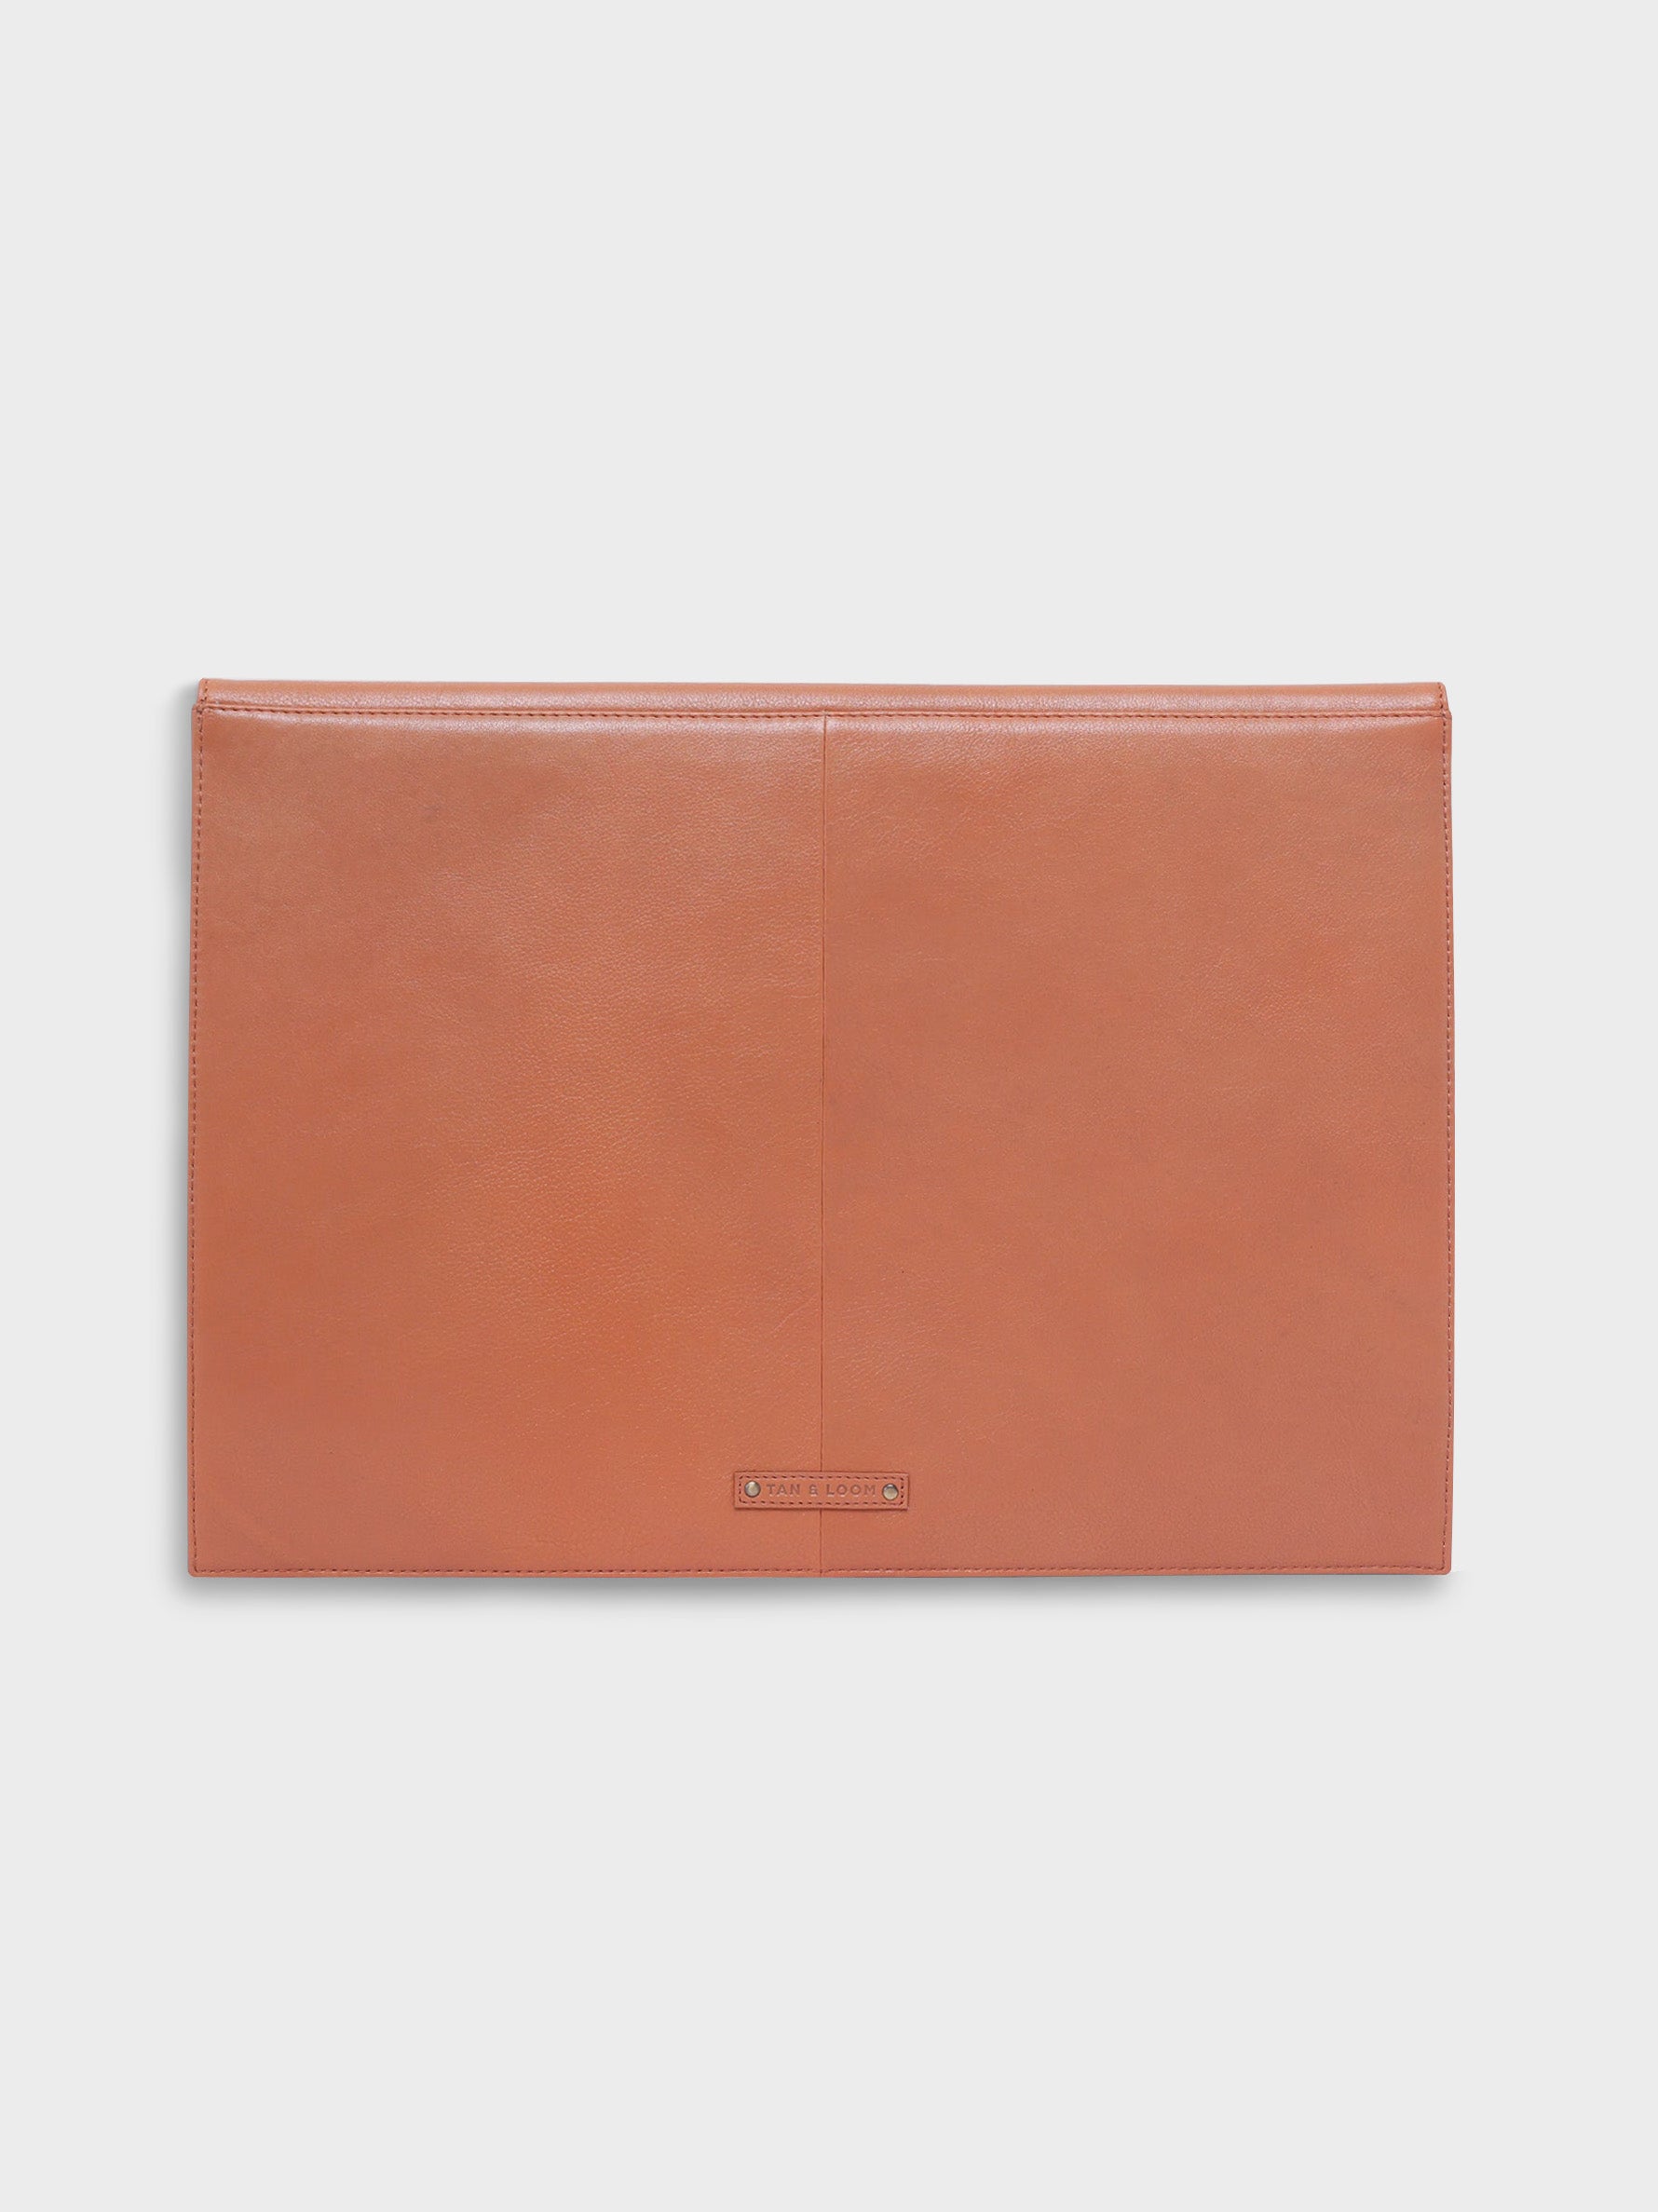 Handcrafted Genuine Vegetable Tanned Leather Envelope Laptop Sleeve Dusty Peach for Women Tan & Loom